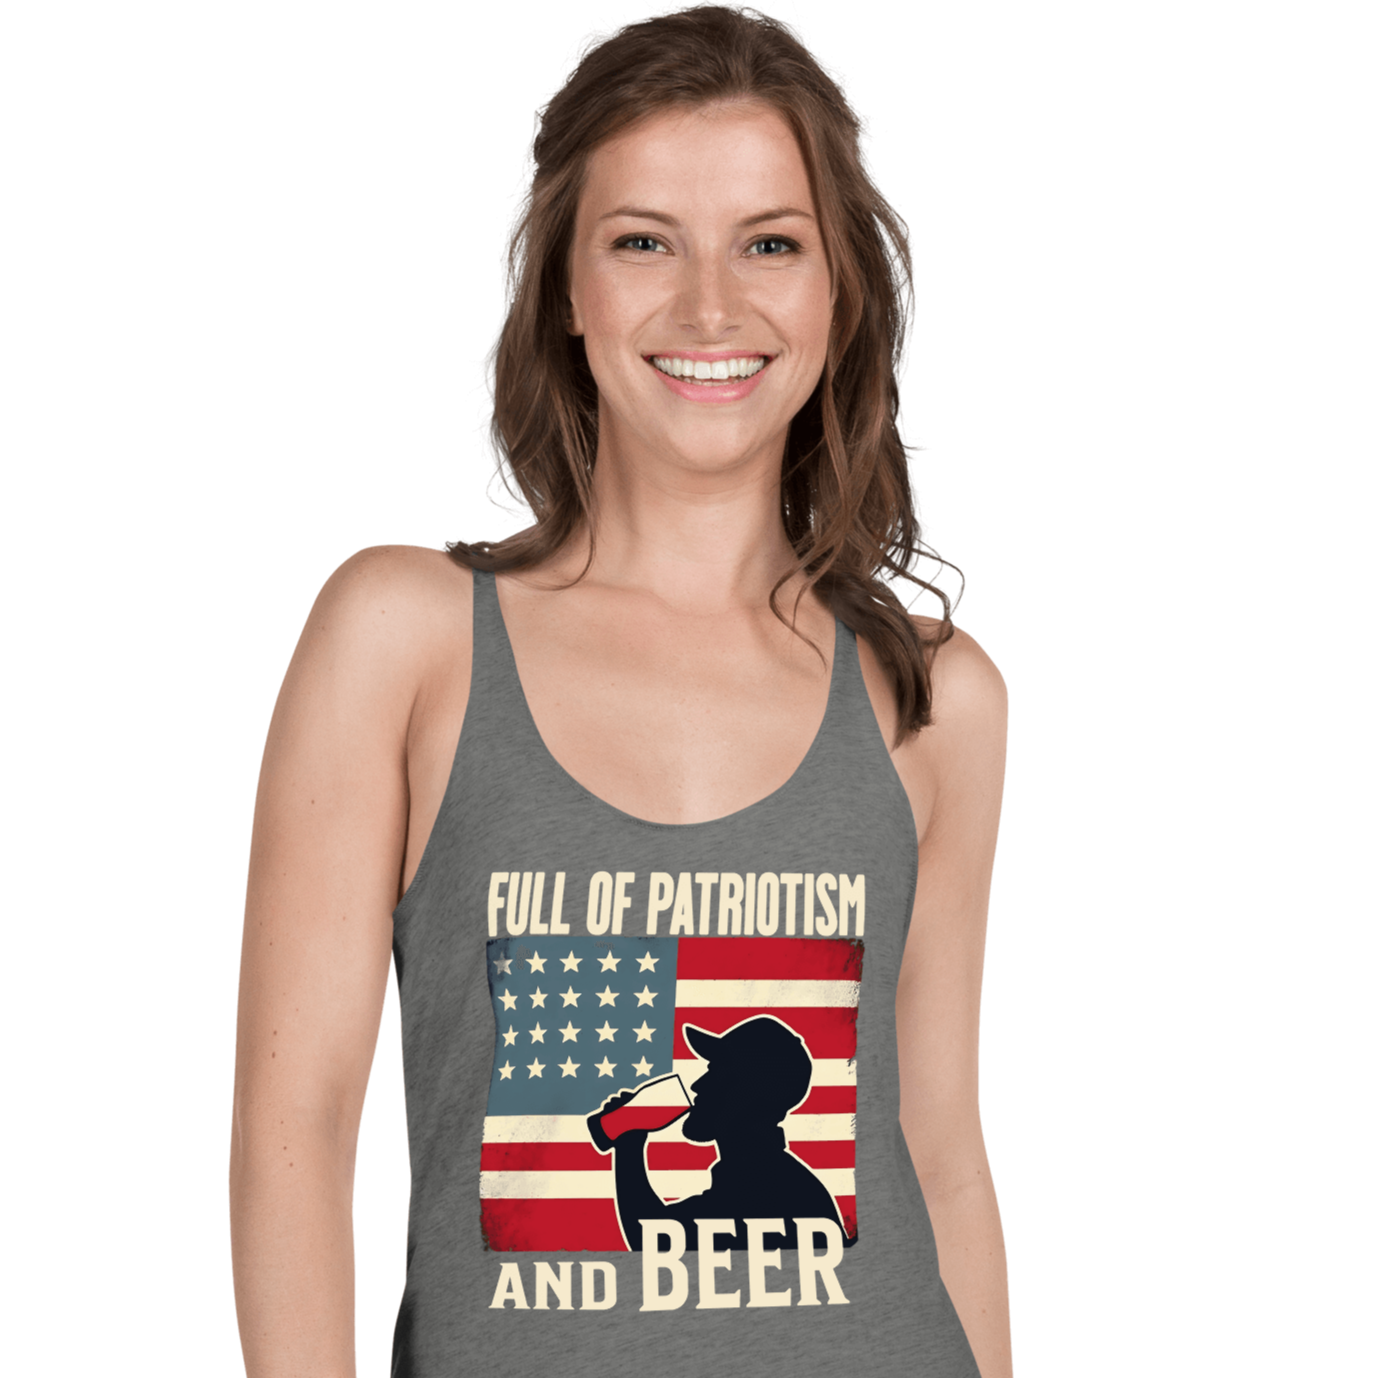 Racerback tank with Full of Patriotism and Beer text and a distressed American flag background. Perfect for 4th of July.